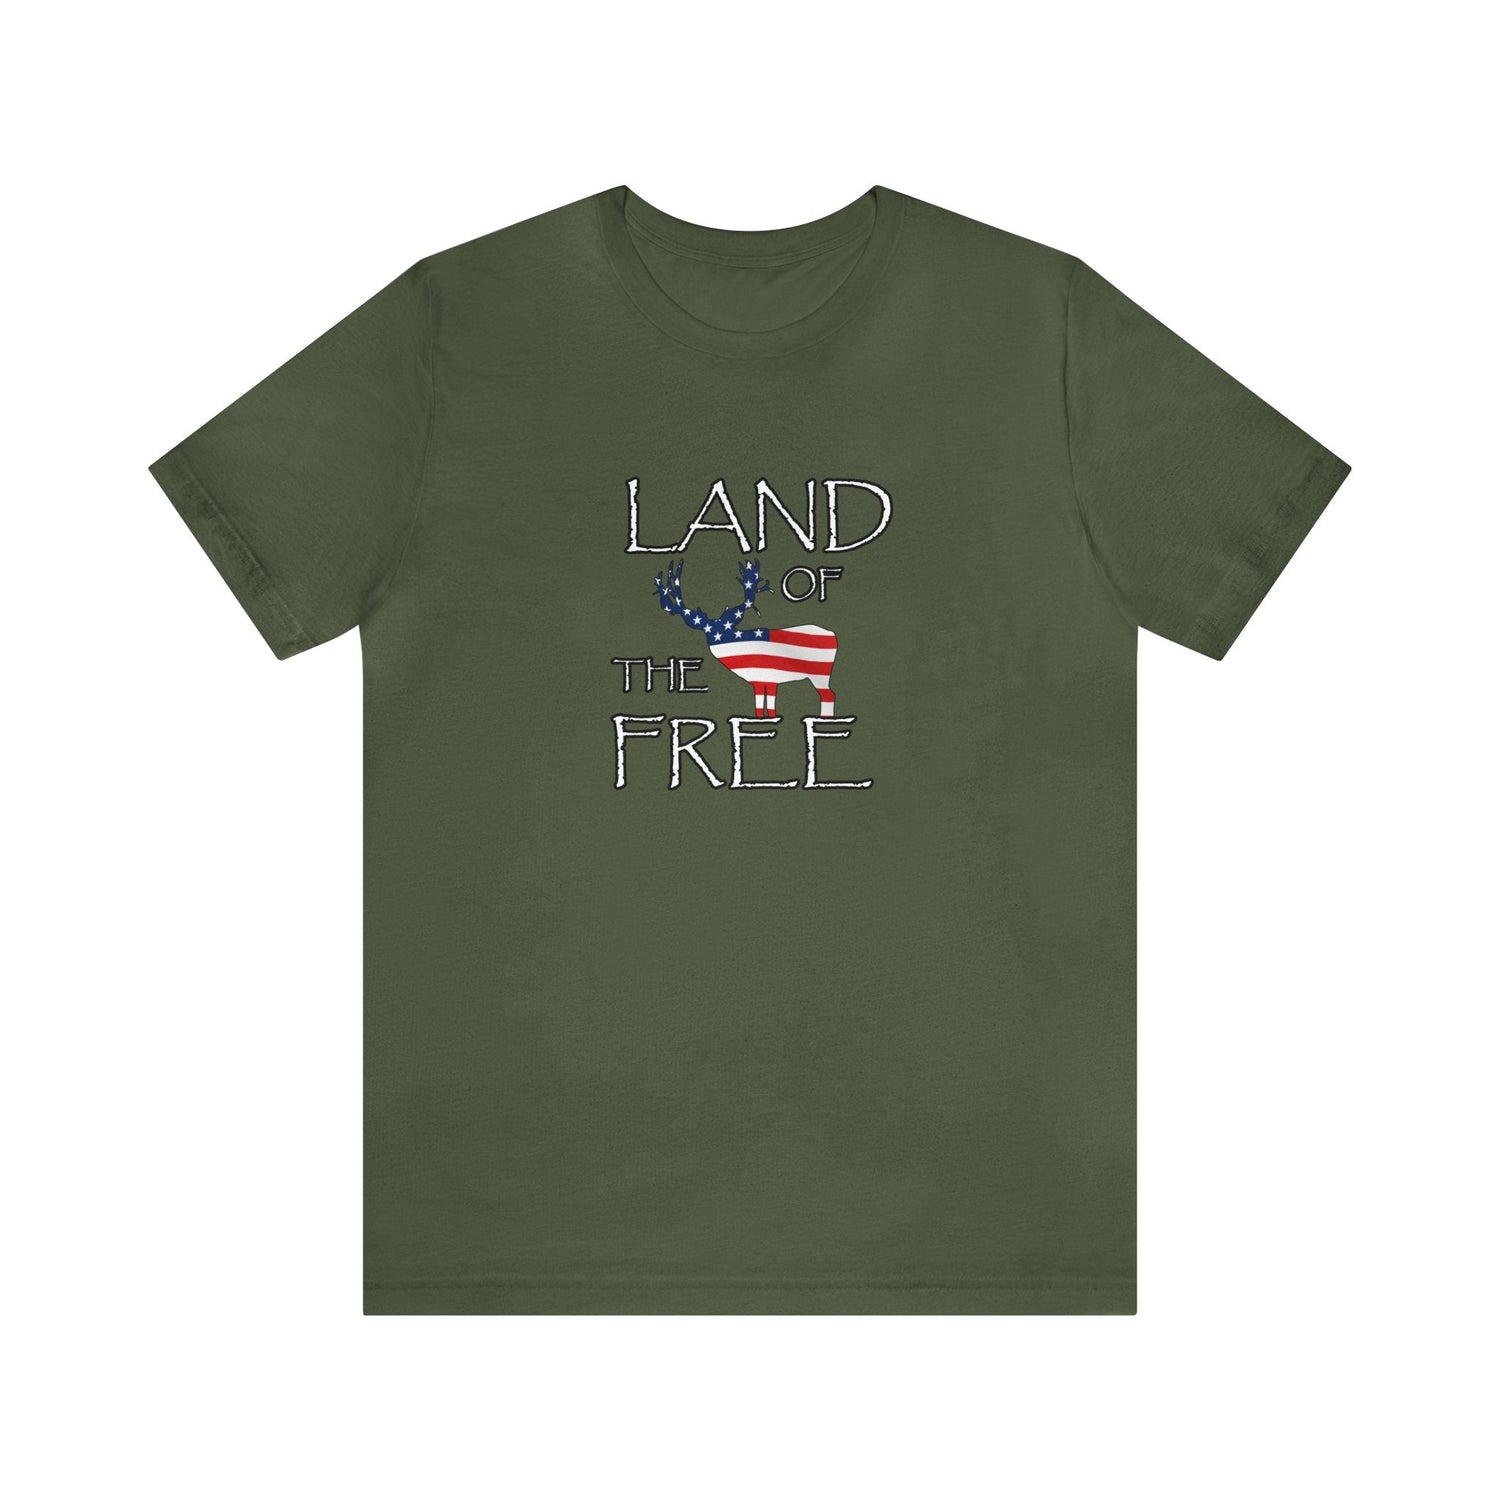 Western deer hunting t-shirt, color military green, back design placement